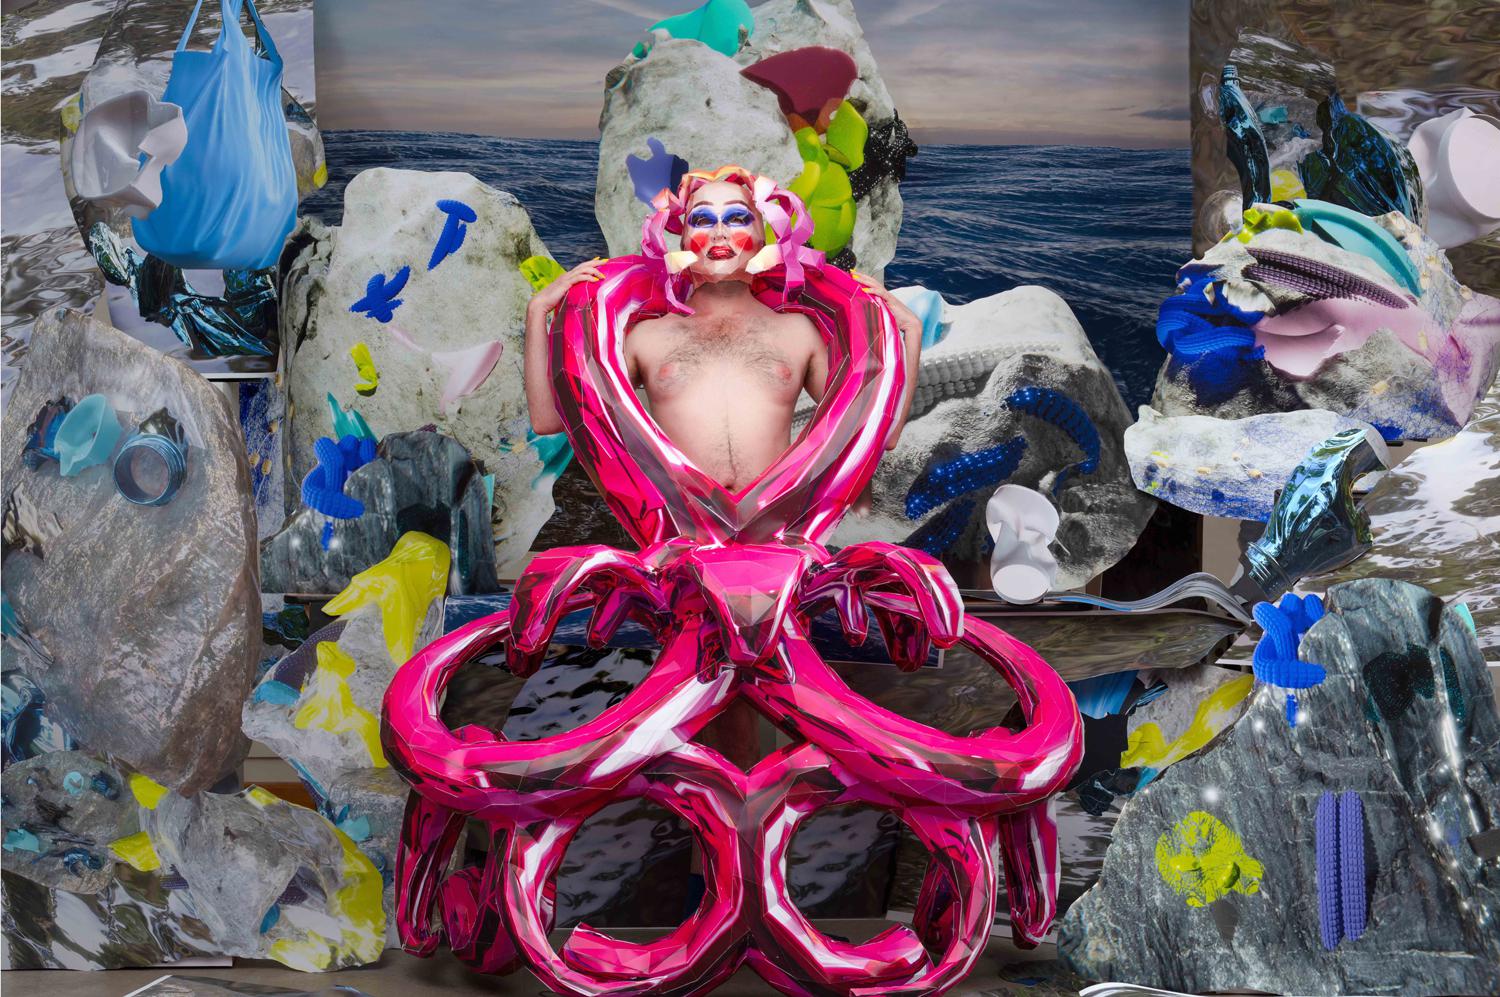 male figure with makeup stands shirtless shrouded in pink loops around his body and colourful shapes behind him. Image has cartoon like graphics.